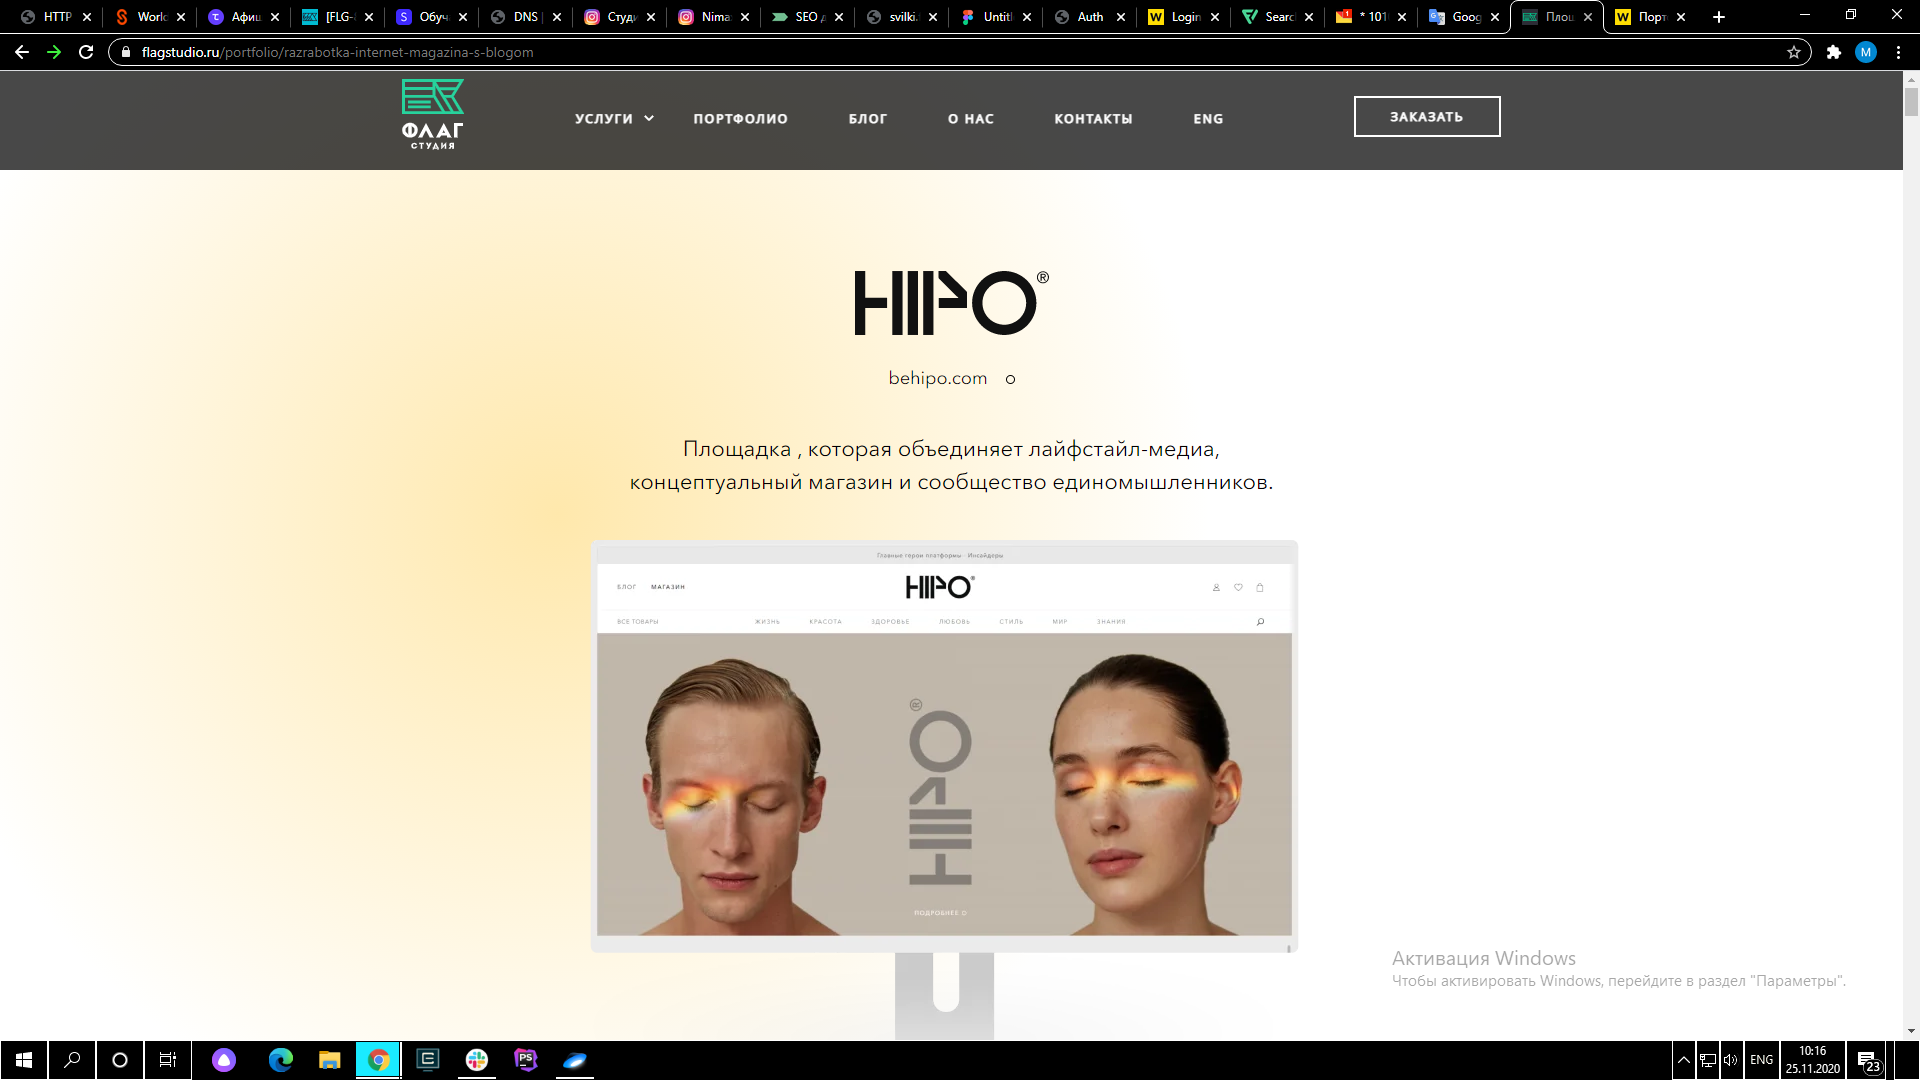 HIPO is a new media platform about quality of life and self-development